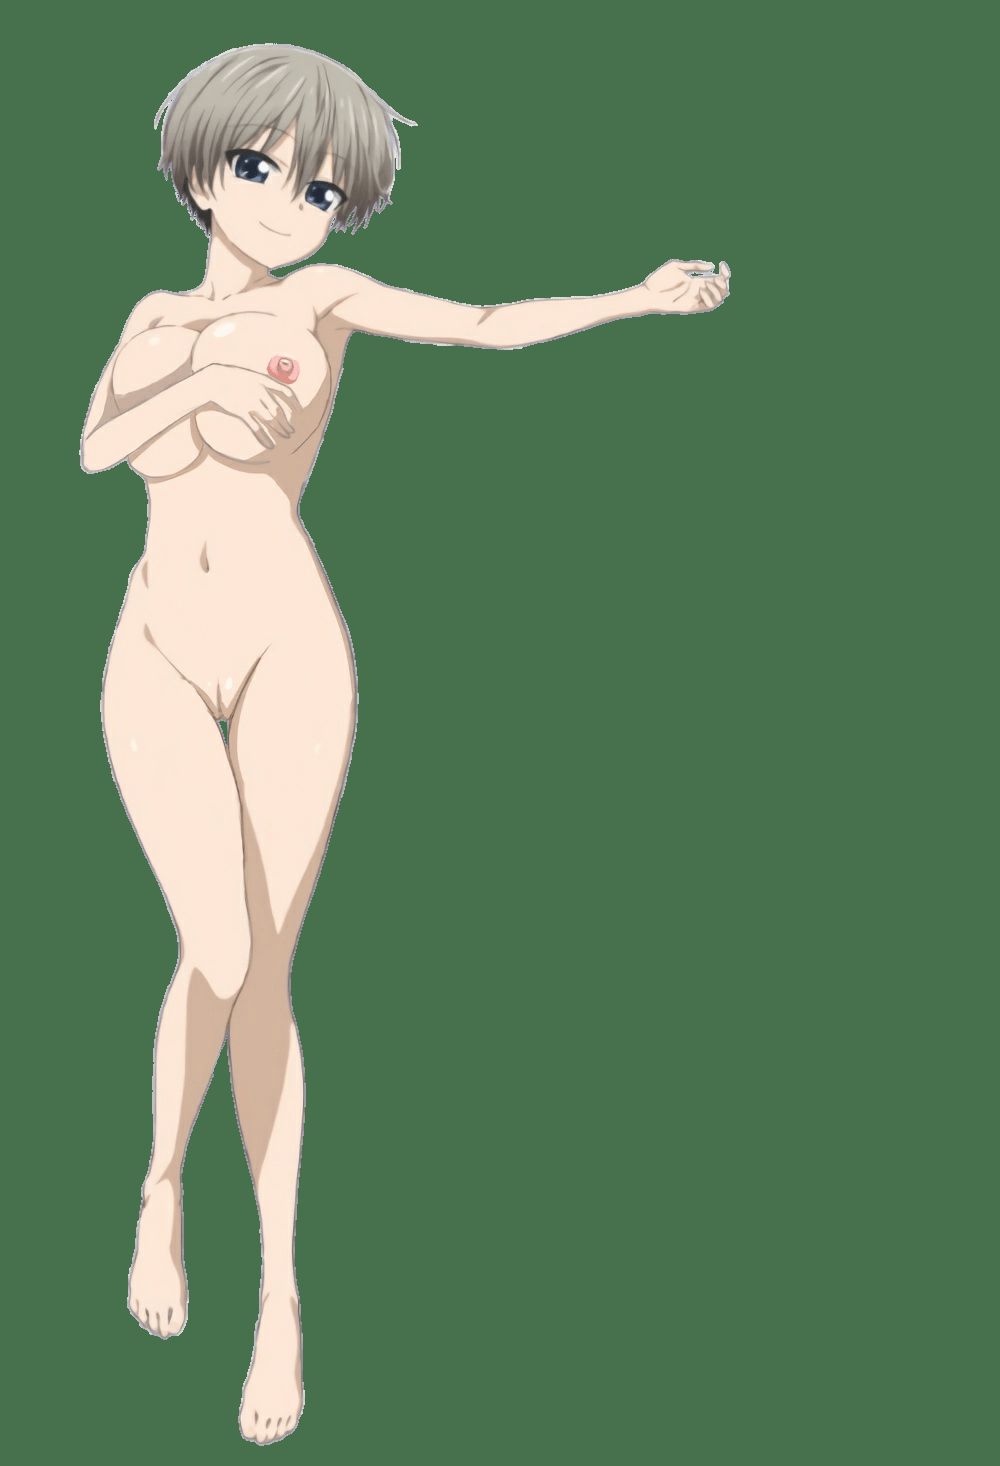 【Erocora Character Material】PNG background transparent erotic image such as anime characters Part 421 4